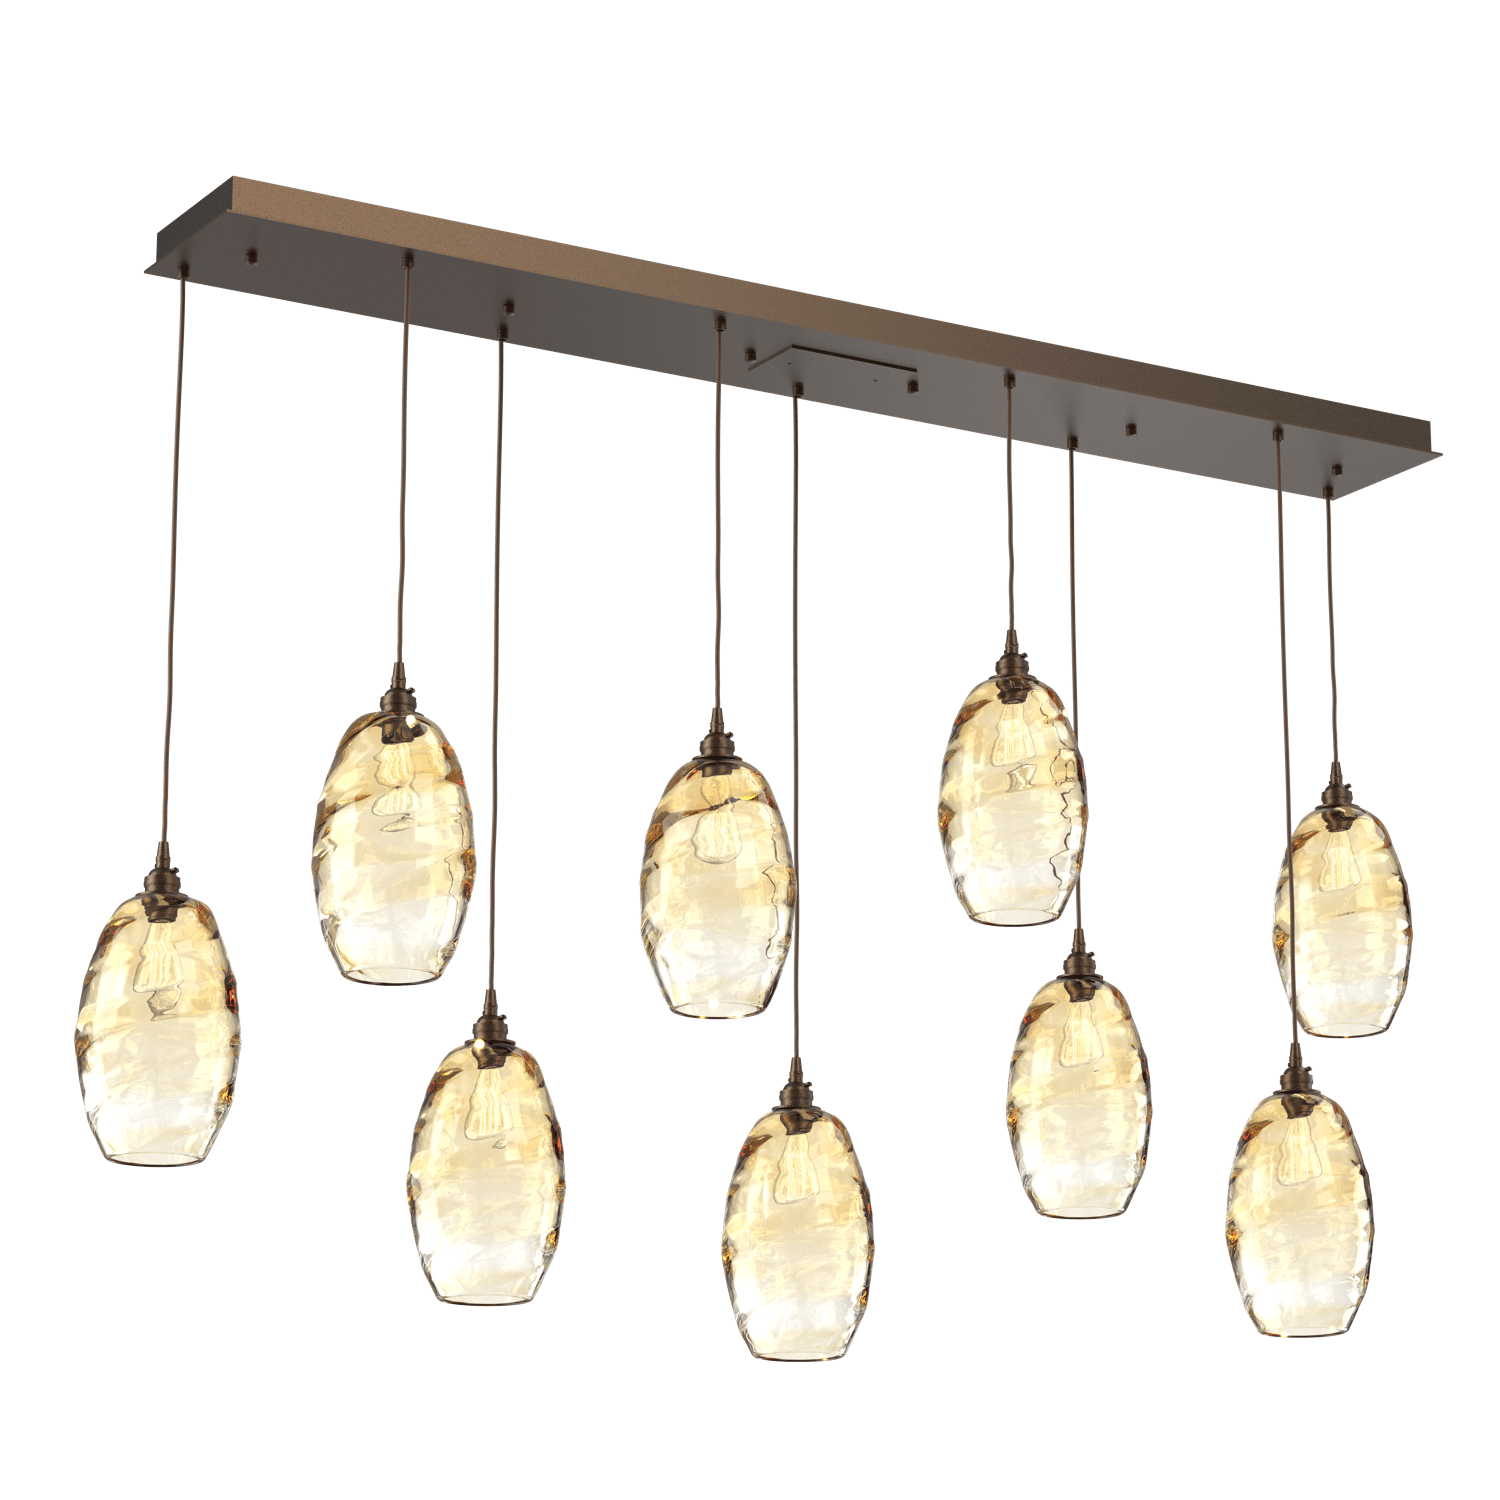 PLB0035-09-FB-OA-Hammerton-Studio-Optic-Blown-Glass-Elisse-9-light-linear-pendant-chandelier-with-flat-bronze-finish-and-optic-amber-blown-glass-shades-and-incandescent-lamping